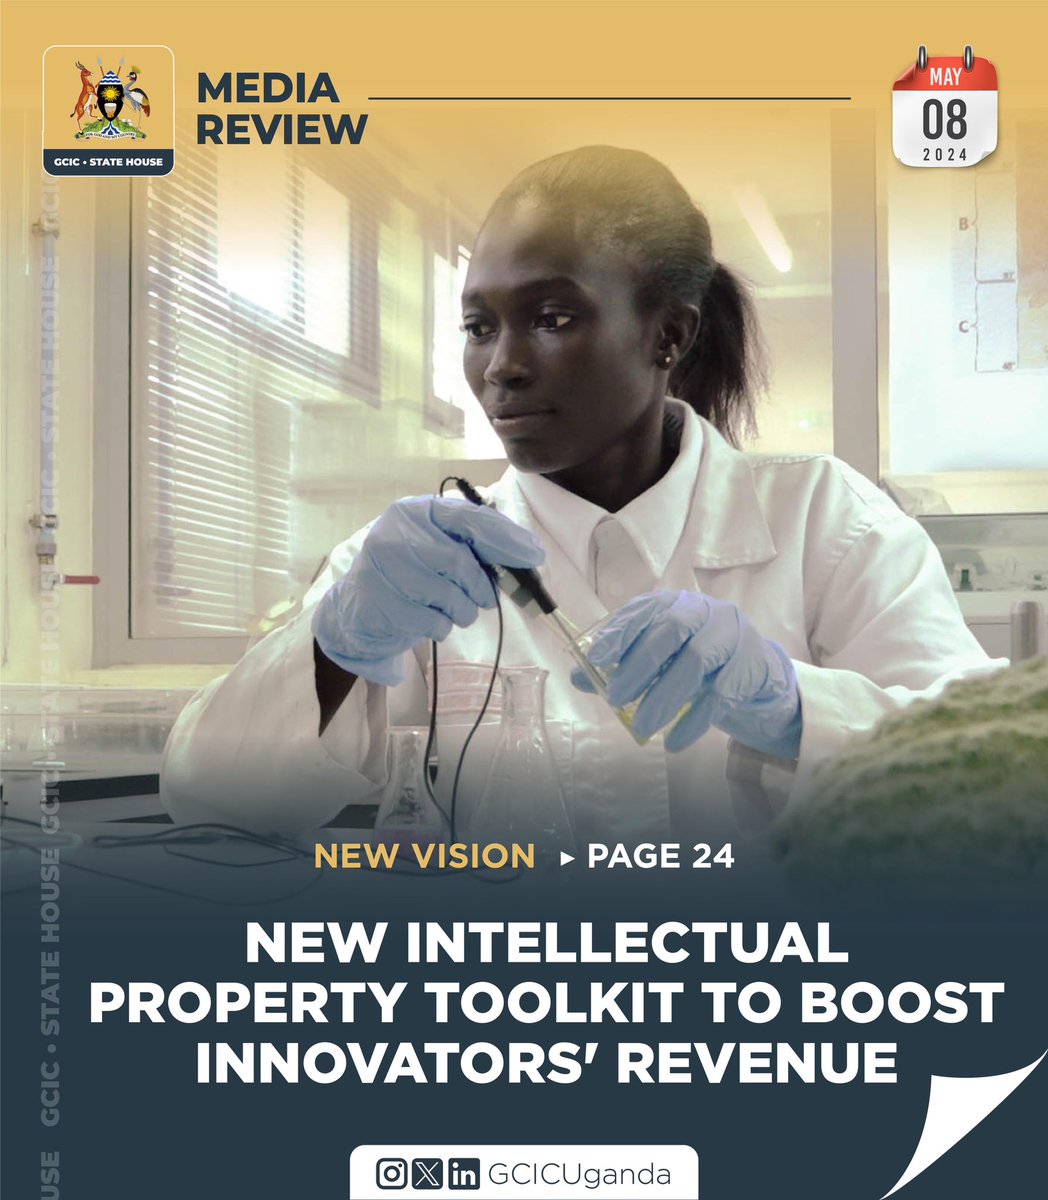 .@GovUganda Launches Intellectual Property Management Toolkit to Safeguard Creators, Drive Revenue, Foster Innovation, and Enhance Export Opportunities Across the Region and Continent.
#GCICMediaReview 
#OpenGovUg